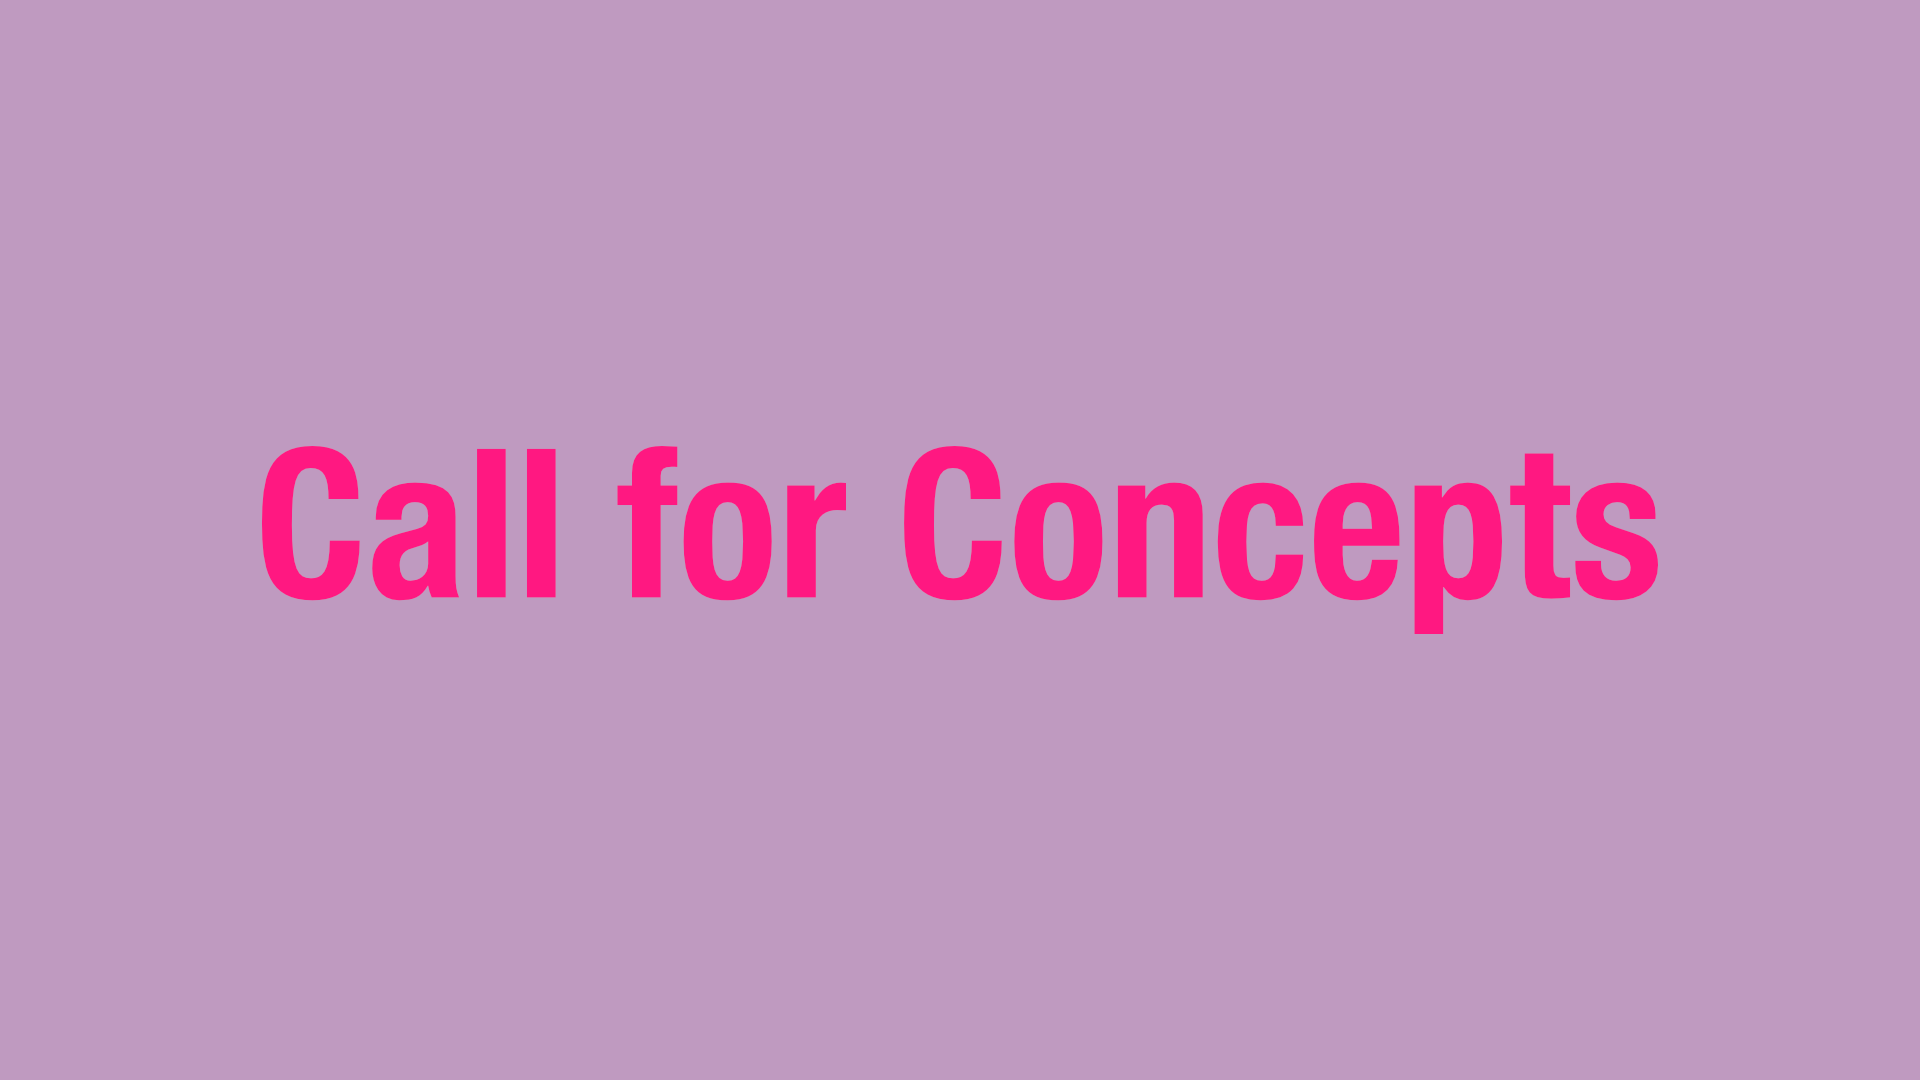 Call for Concepts